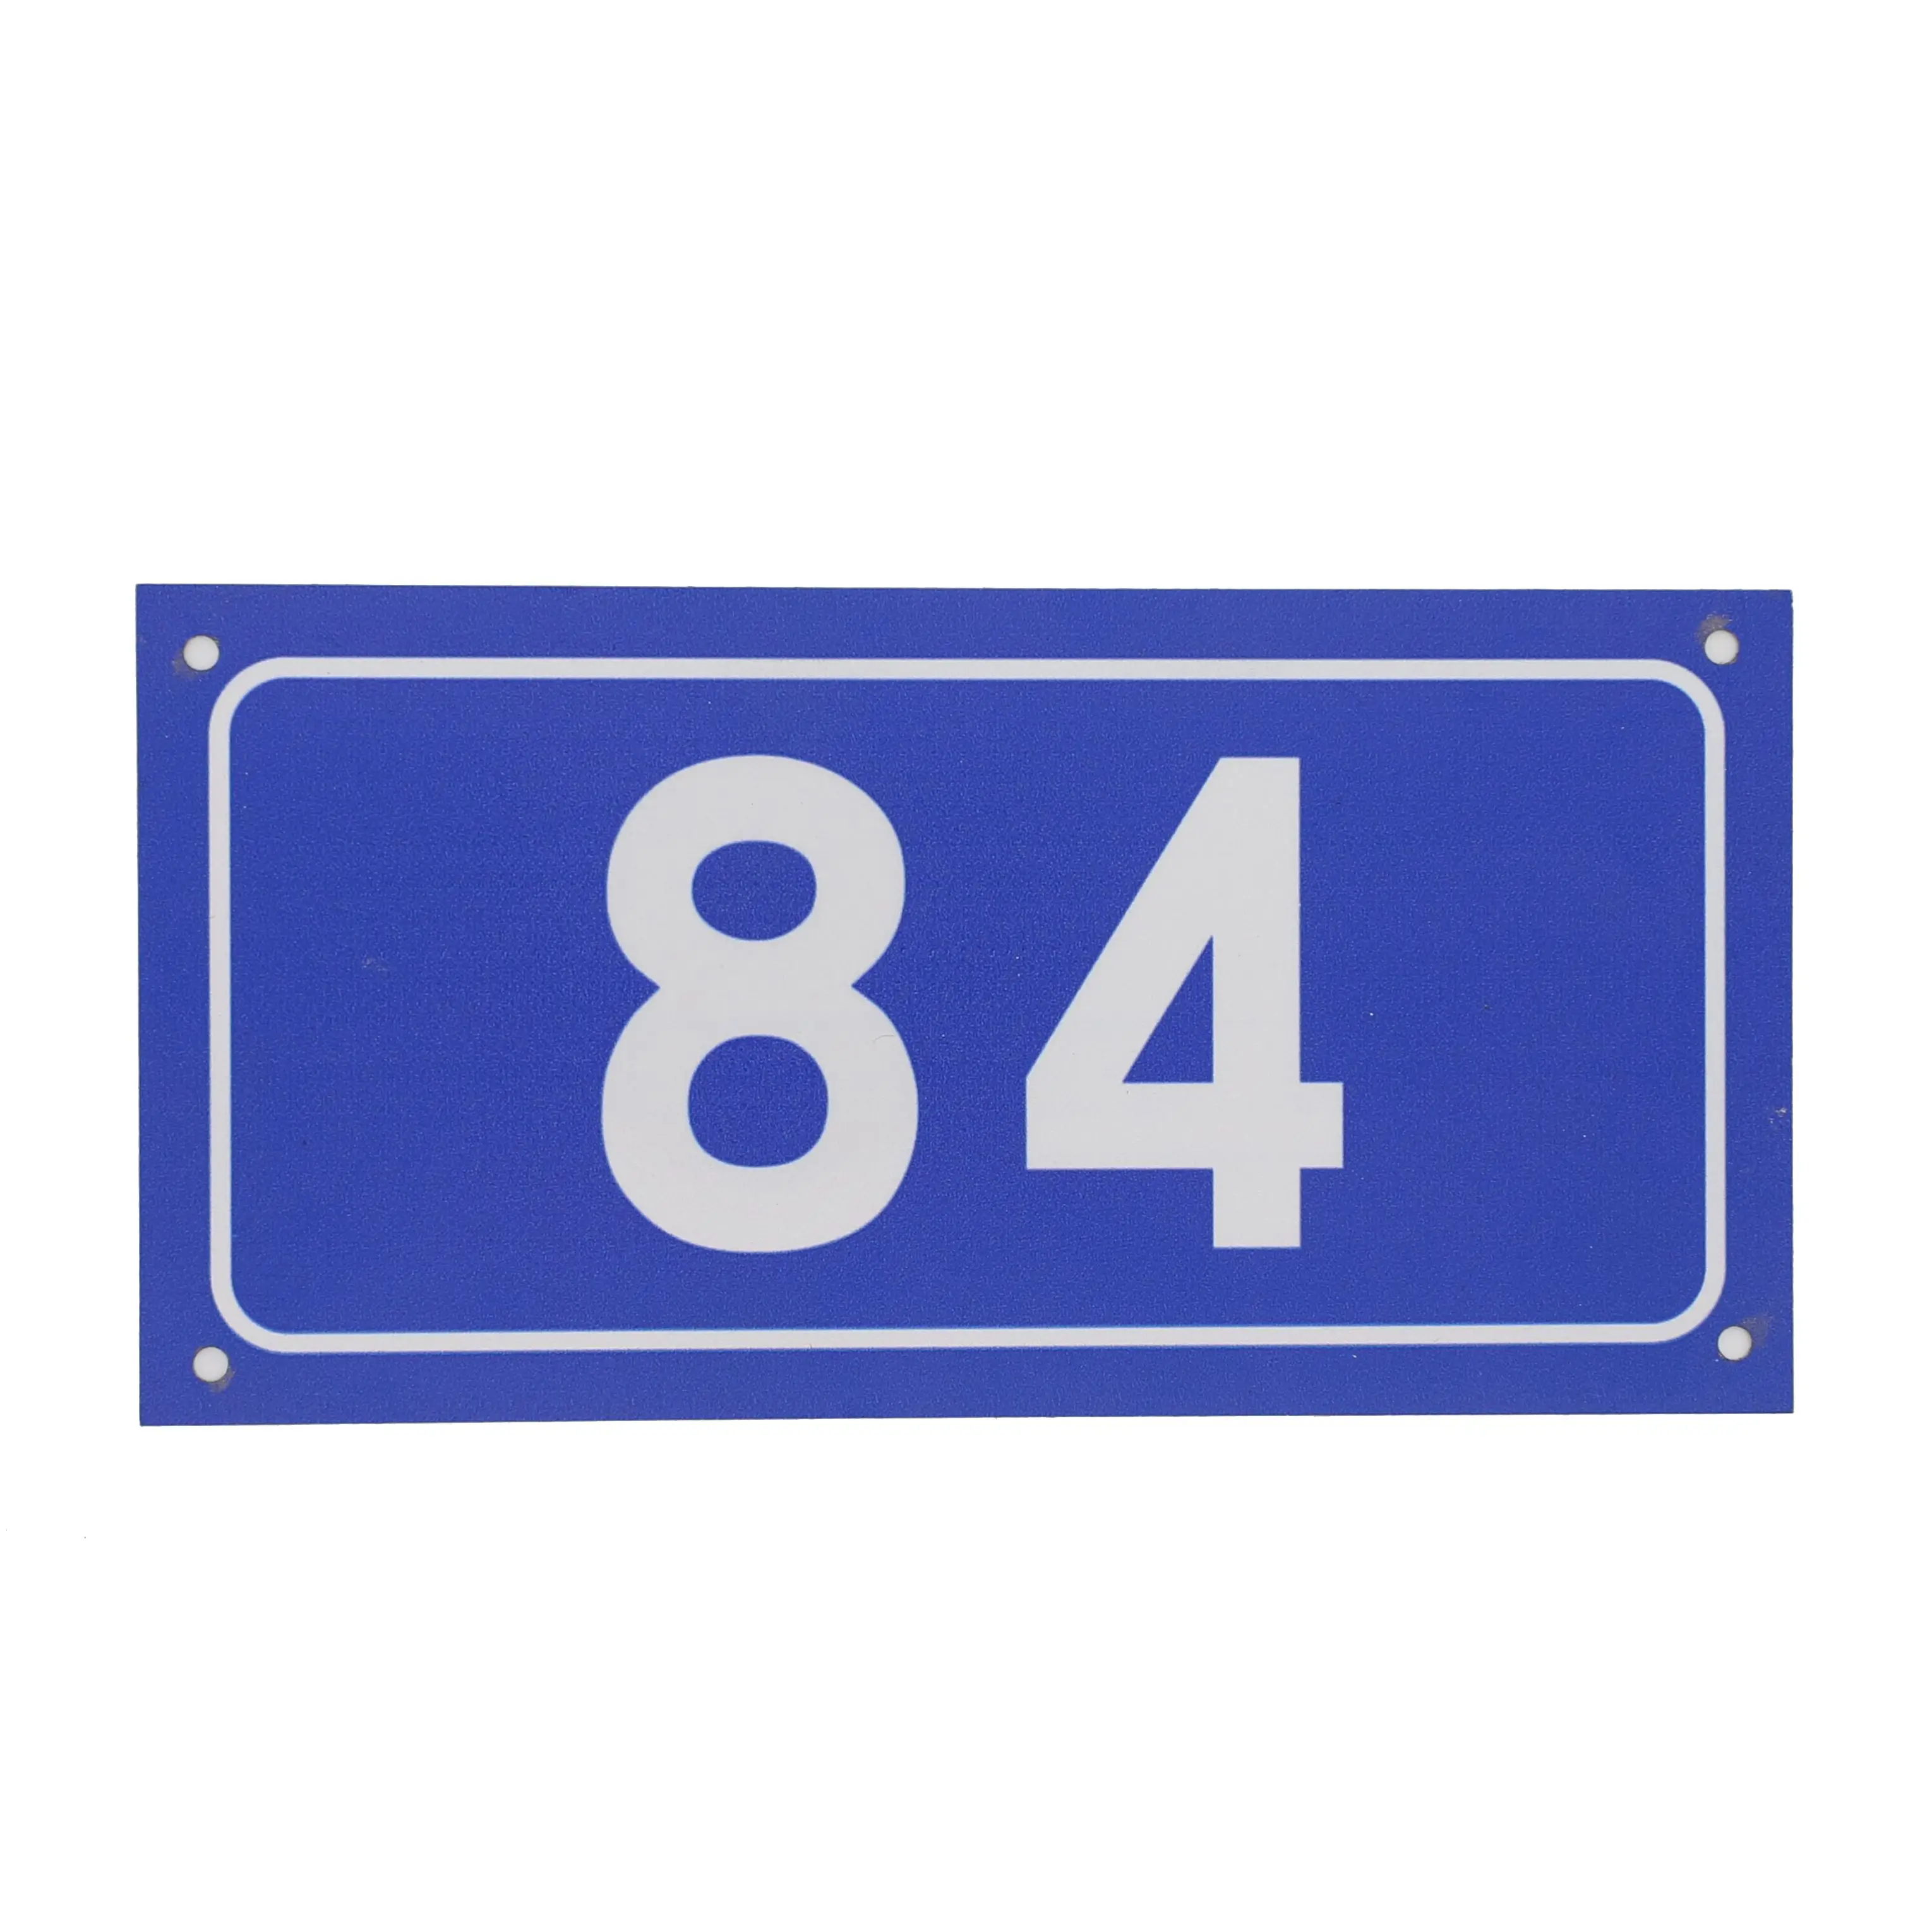 Reflective Door Sign Number Custom Made 1mm With UV Print Door Plates House Number Aluminum Alloy 20x10cm Drop Shipping